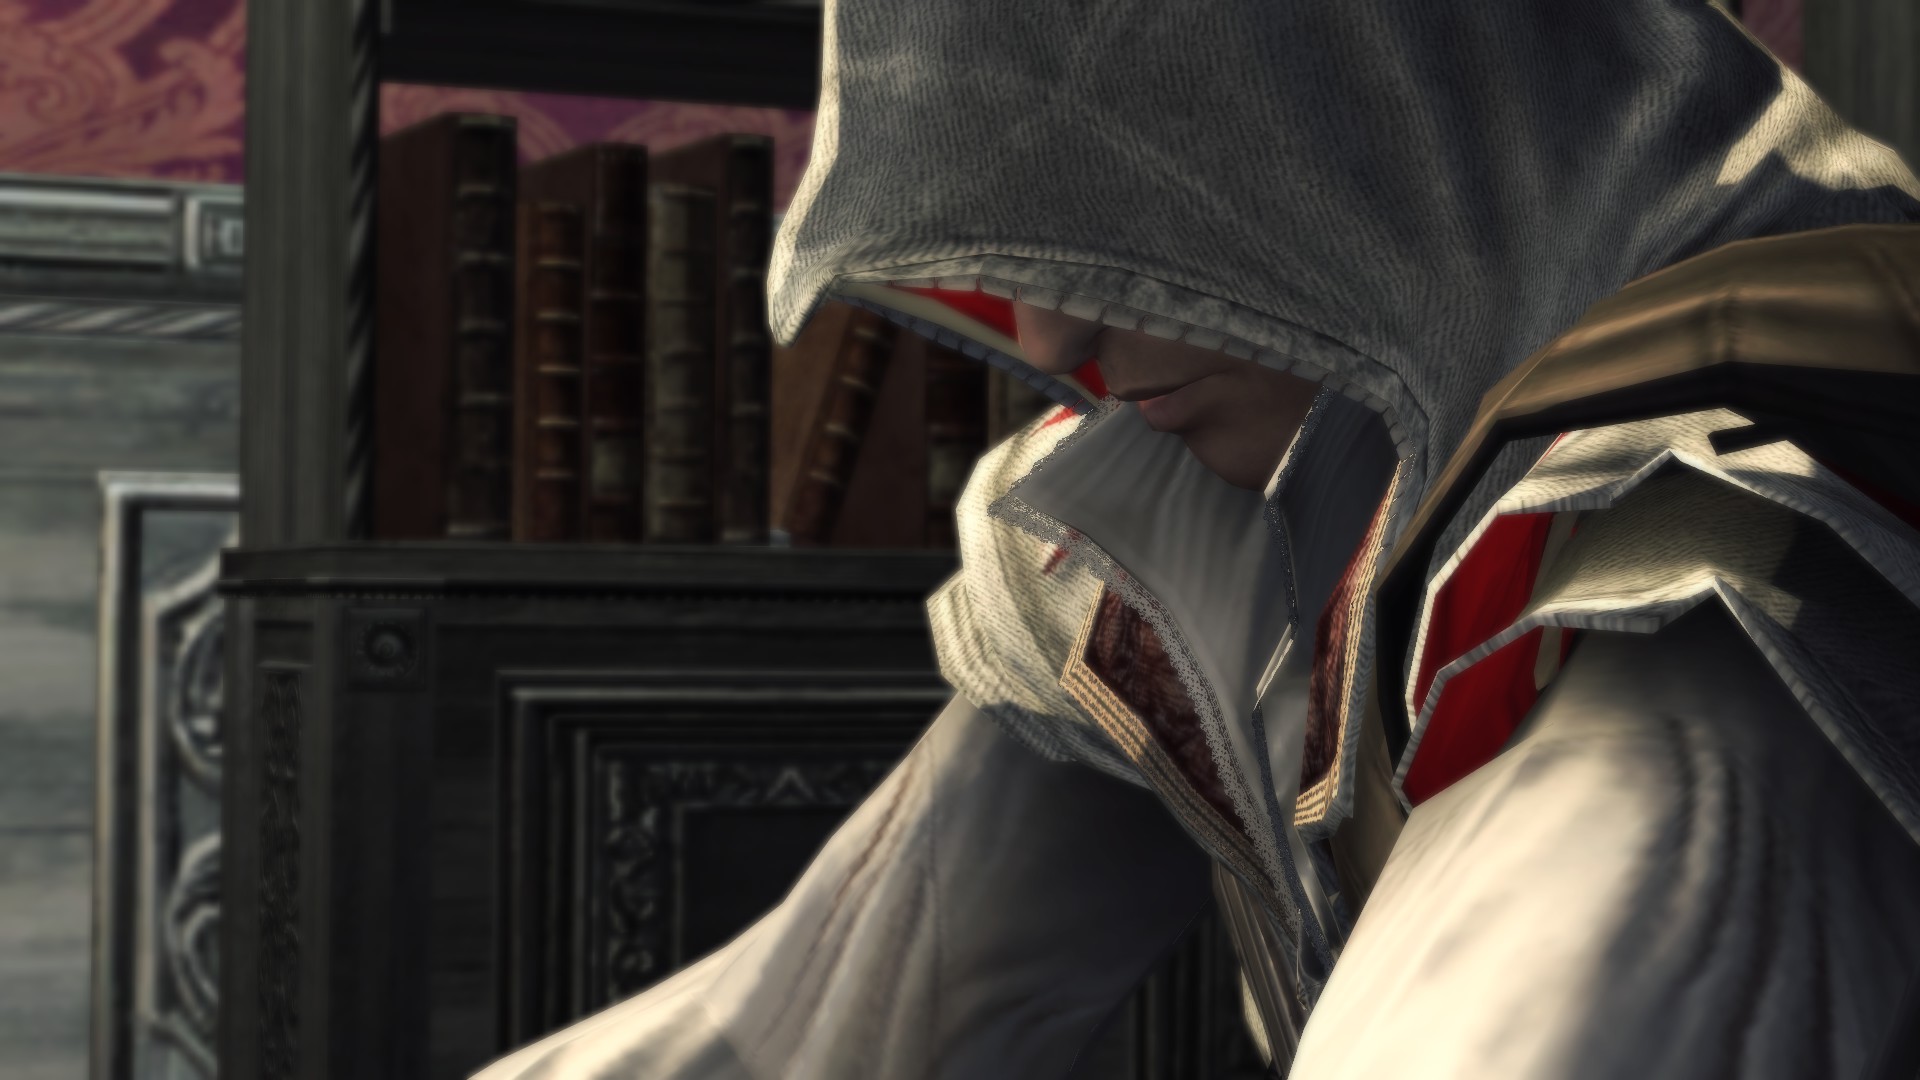 Ubisoft Says We'd Be Stupid Not To Do Annual Assassin's Creed - My Nintendo  News